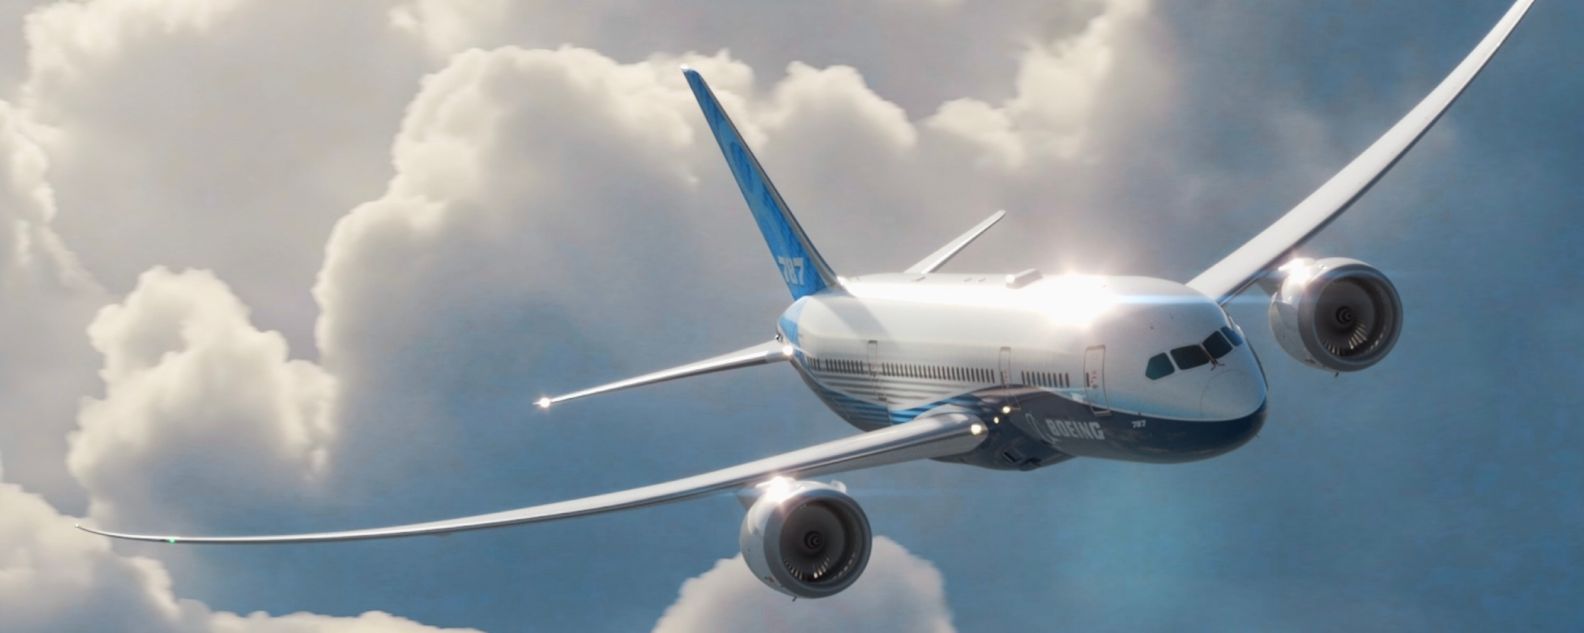 An image shows a 787 Dreamliner in flight.